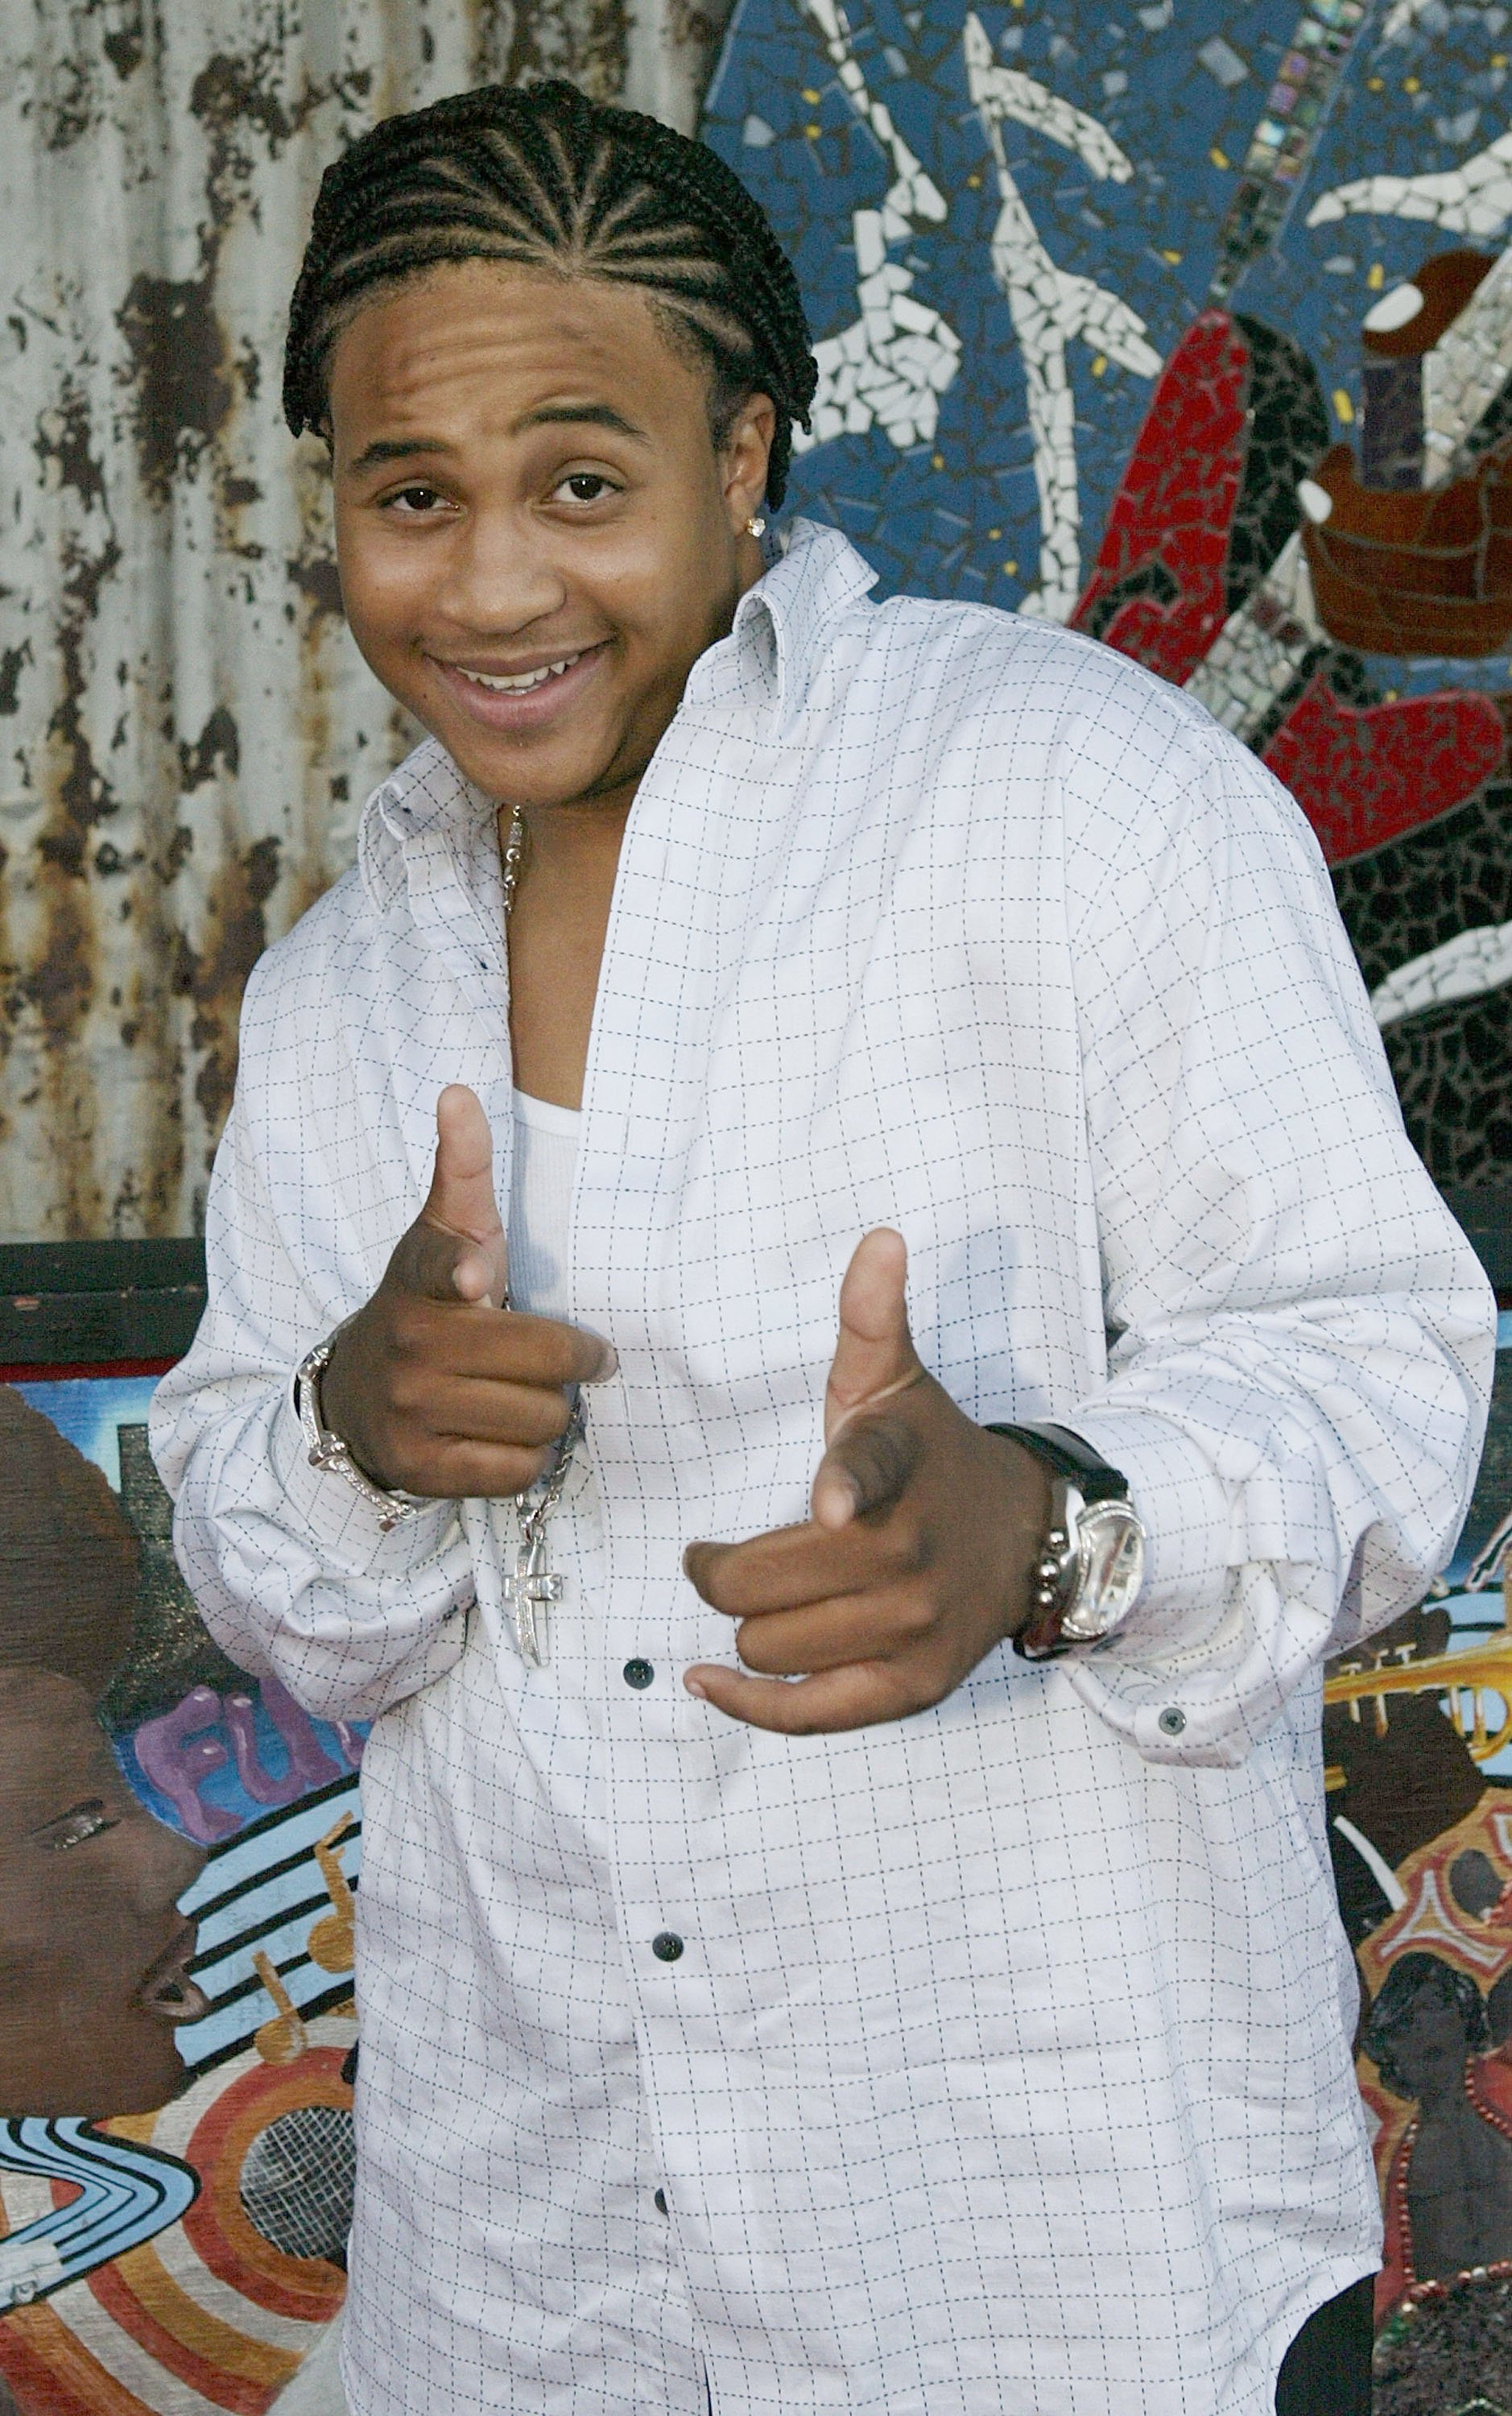 Orlando Brown attends the "American Society of Young Musicians 12th Annual Spring Benefit Concert" on June 3, 2004, in Los Angeles, California. I Source: Getty Images